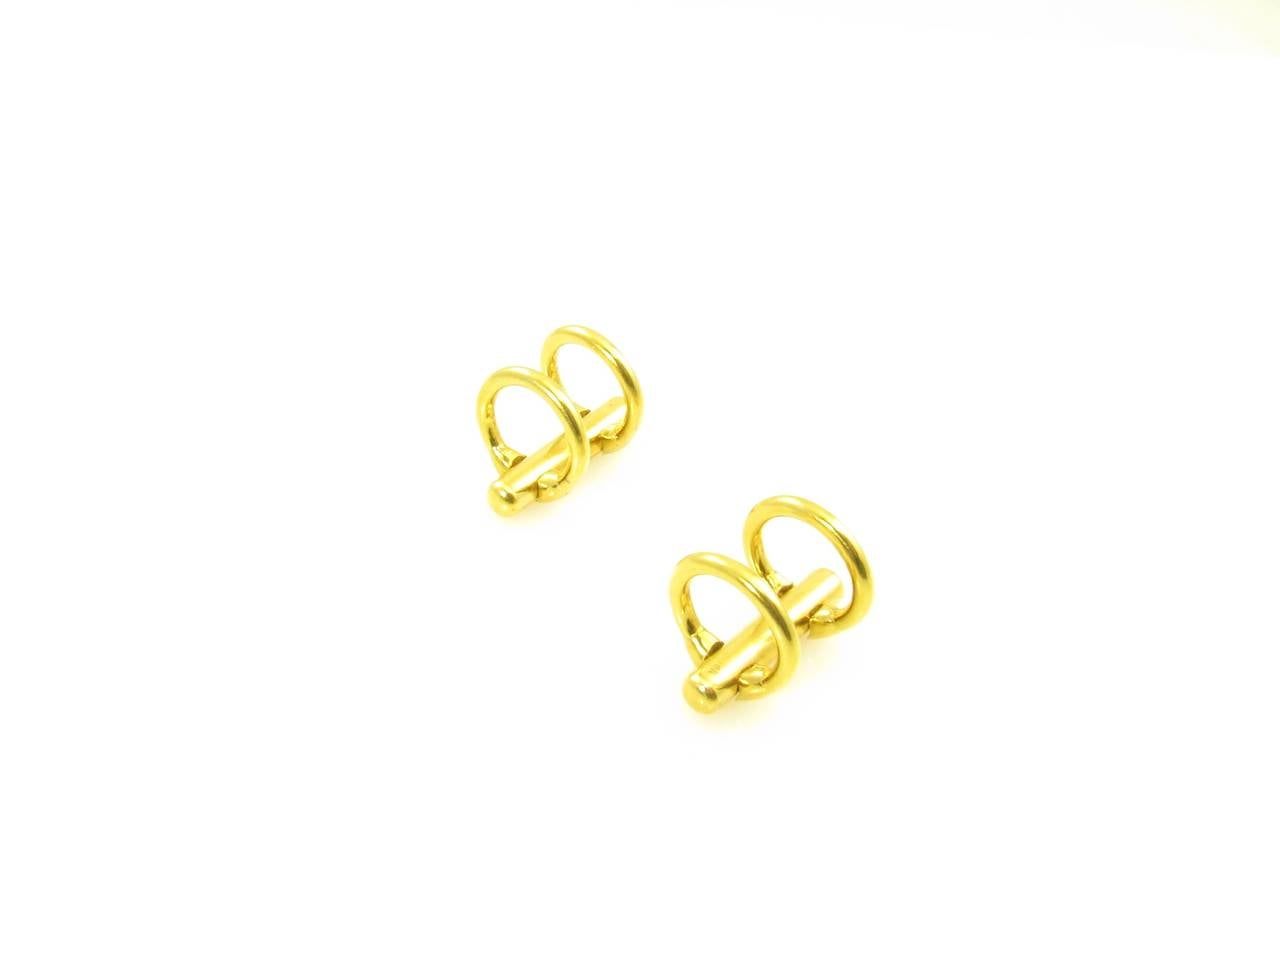 A pair of 18 karat yellow gold double ring style cufflinks.  Each is designed with a center tubular bar, each end with a hinged ring fastener.  The cufflinks have a gross weight of approximately 15.1 grams.